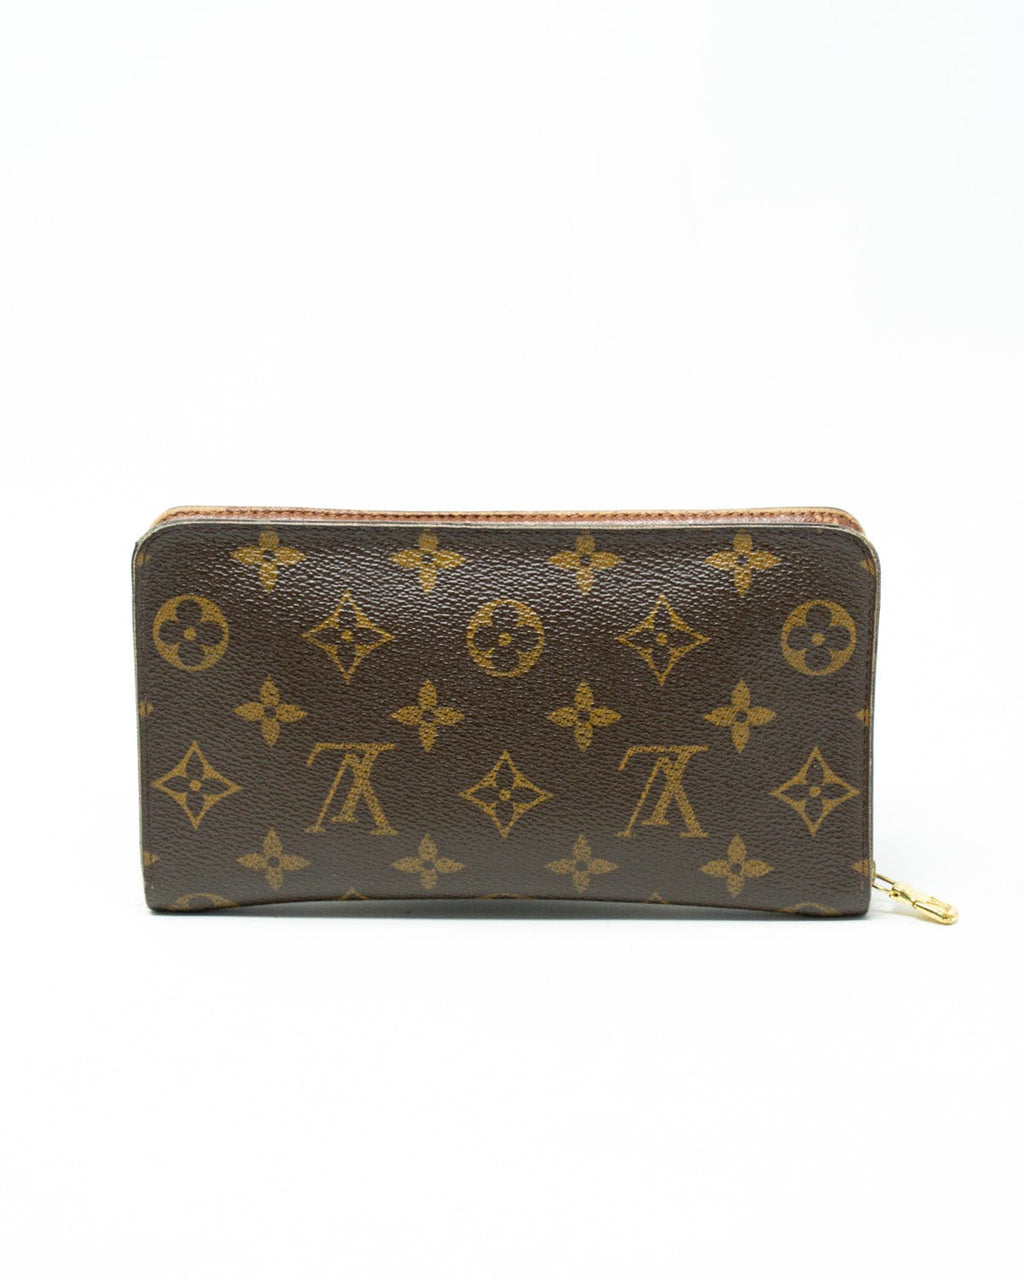 A SPECIAL EDITION JUNGLE BRAZZA WALLET BY LOUIS VUITTON in Australia